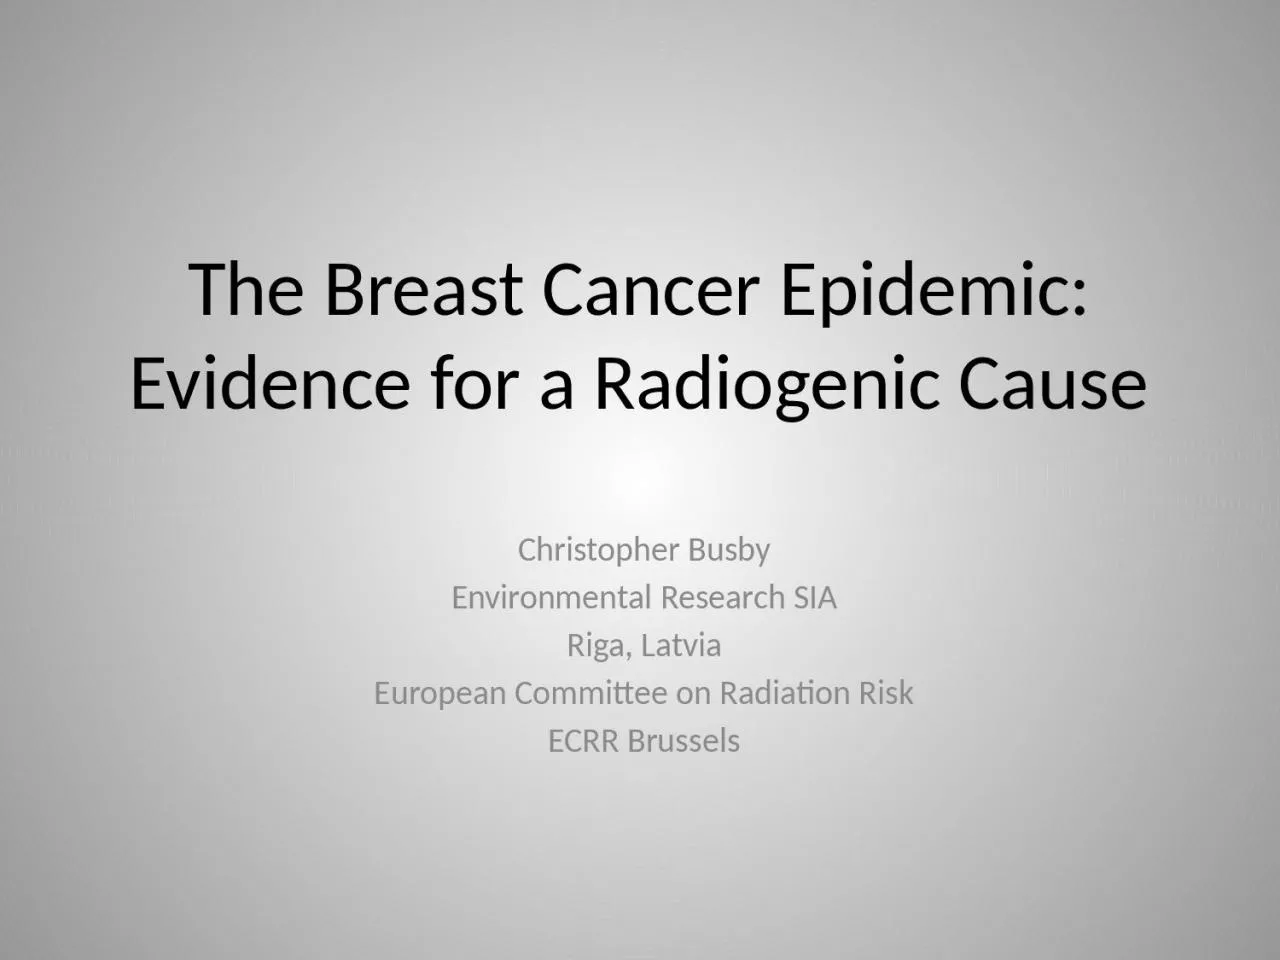 The Breast Cancer Epidemic: Evidence for a